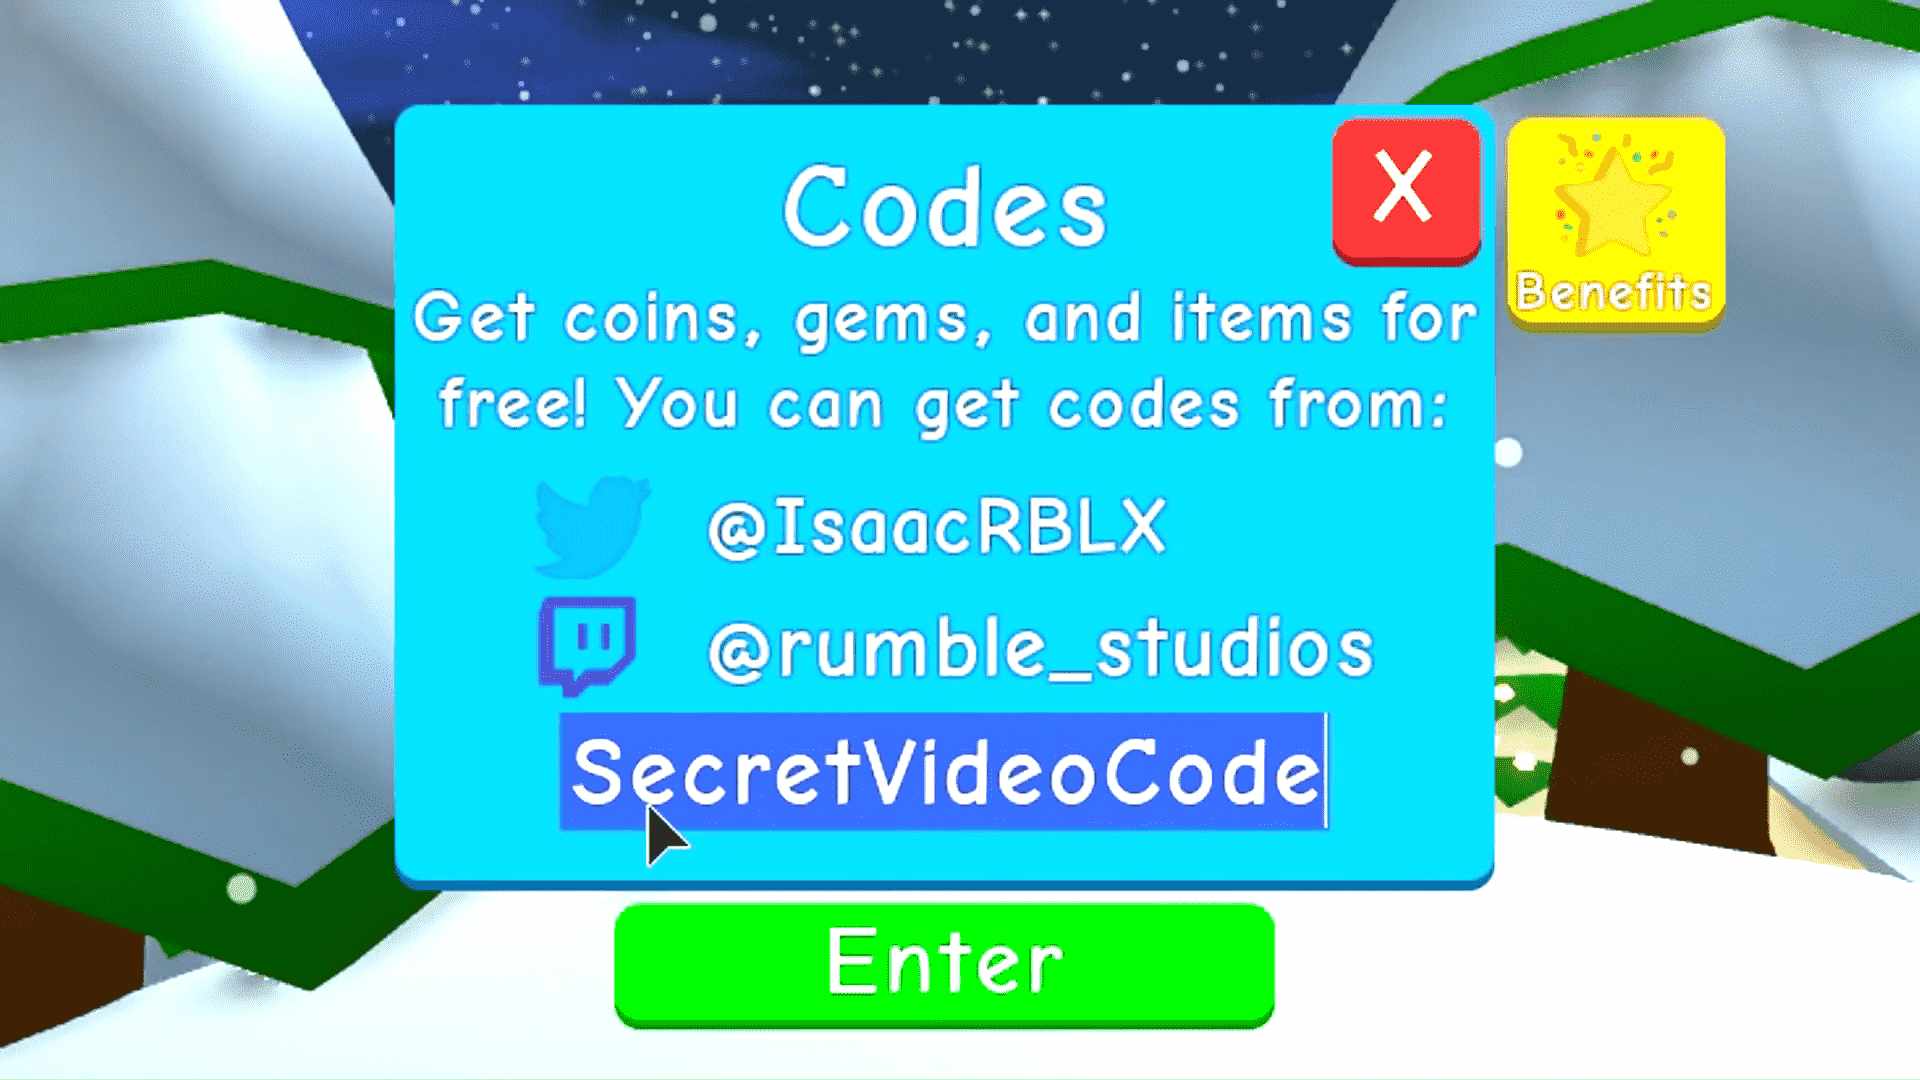 bubble-gum-simulator-codes-for-pets-and-more-2023-gaming-pirate